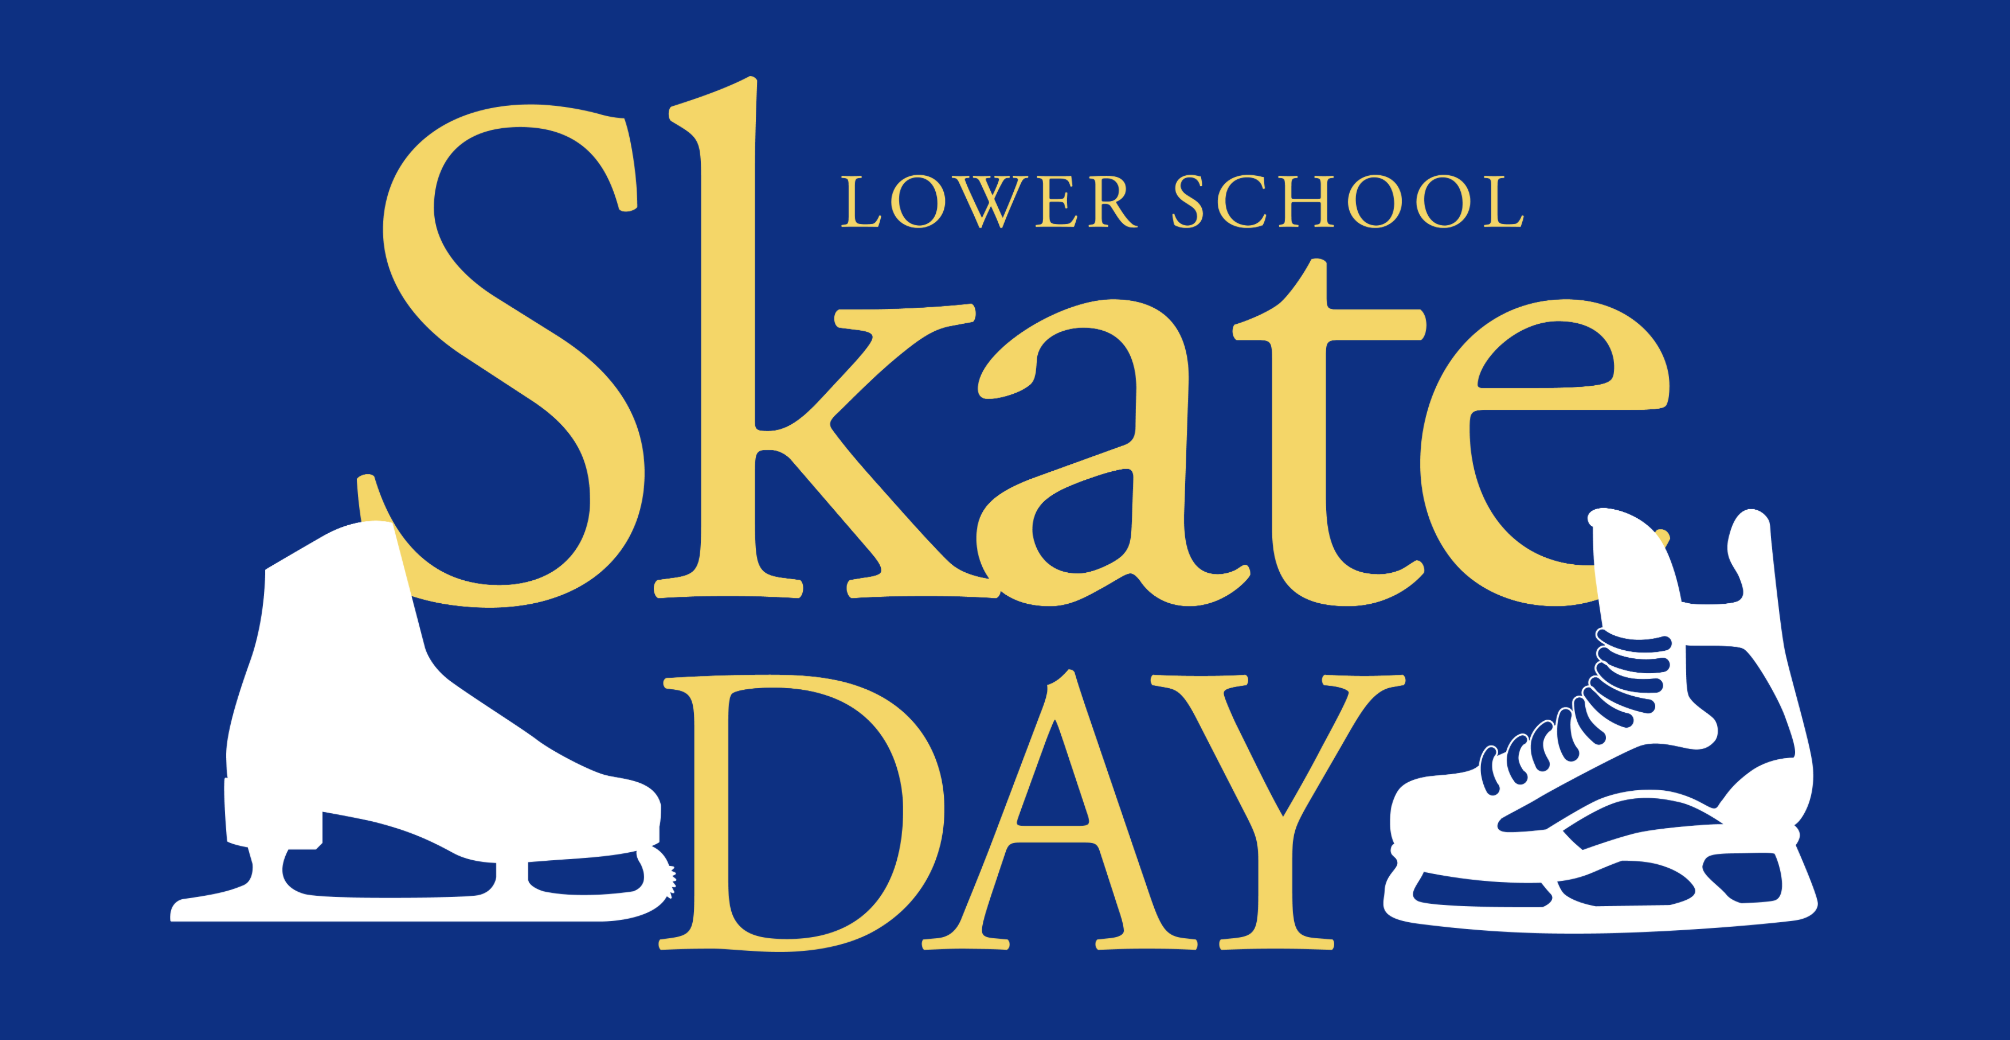 PA presents LS Skate Day 2020